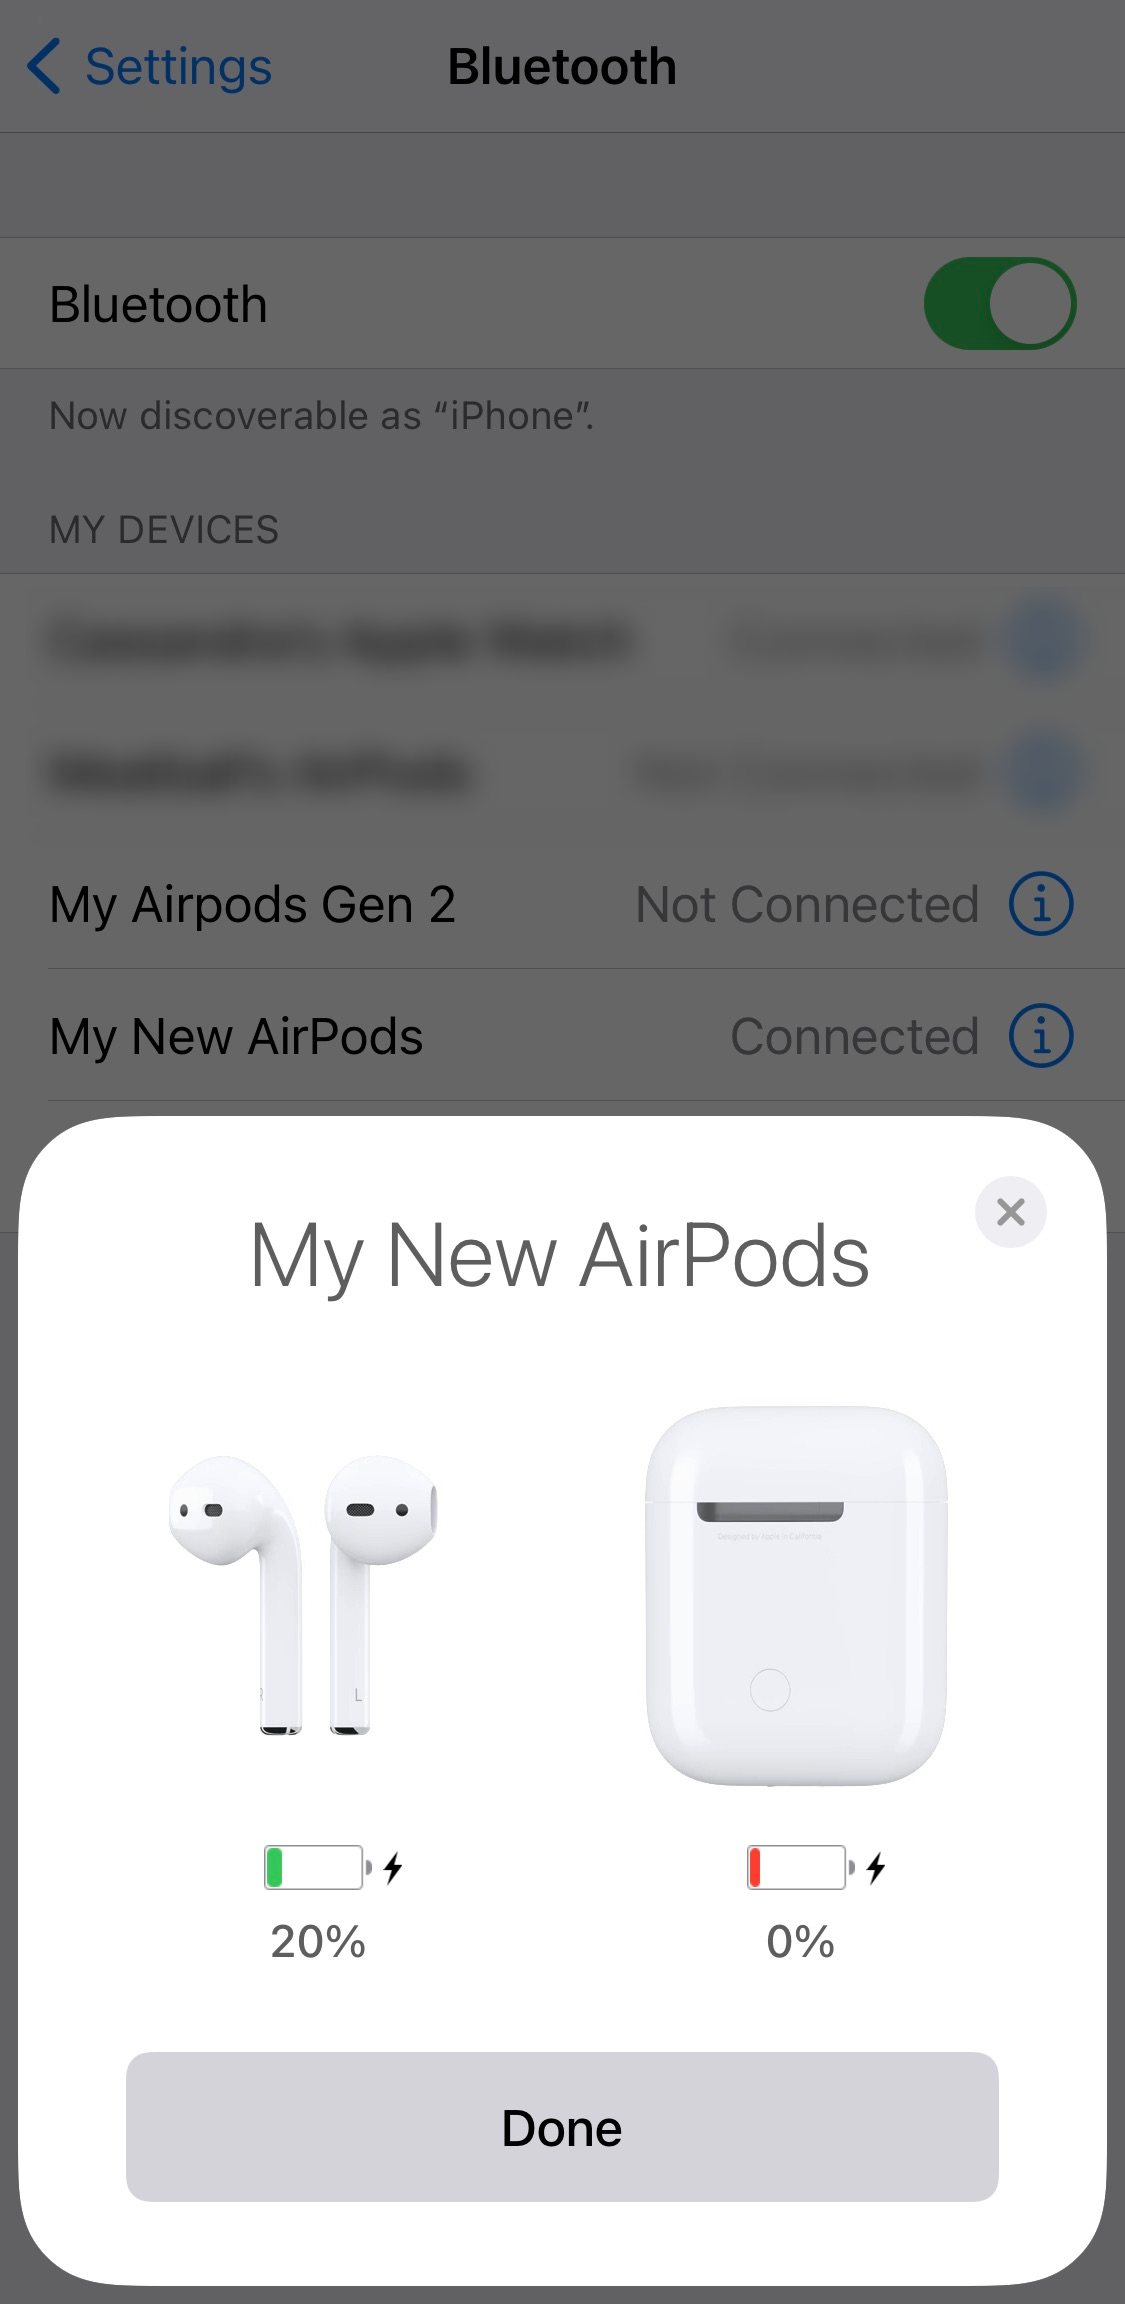 implicitte udsagnsord Apparatet How to Get AirPods to Automatically Connect